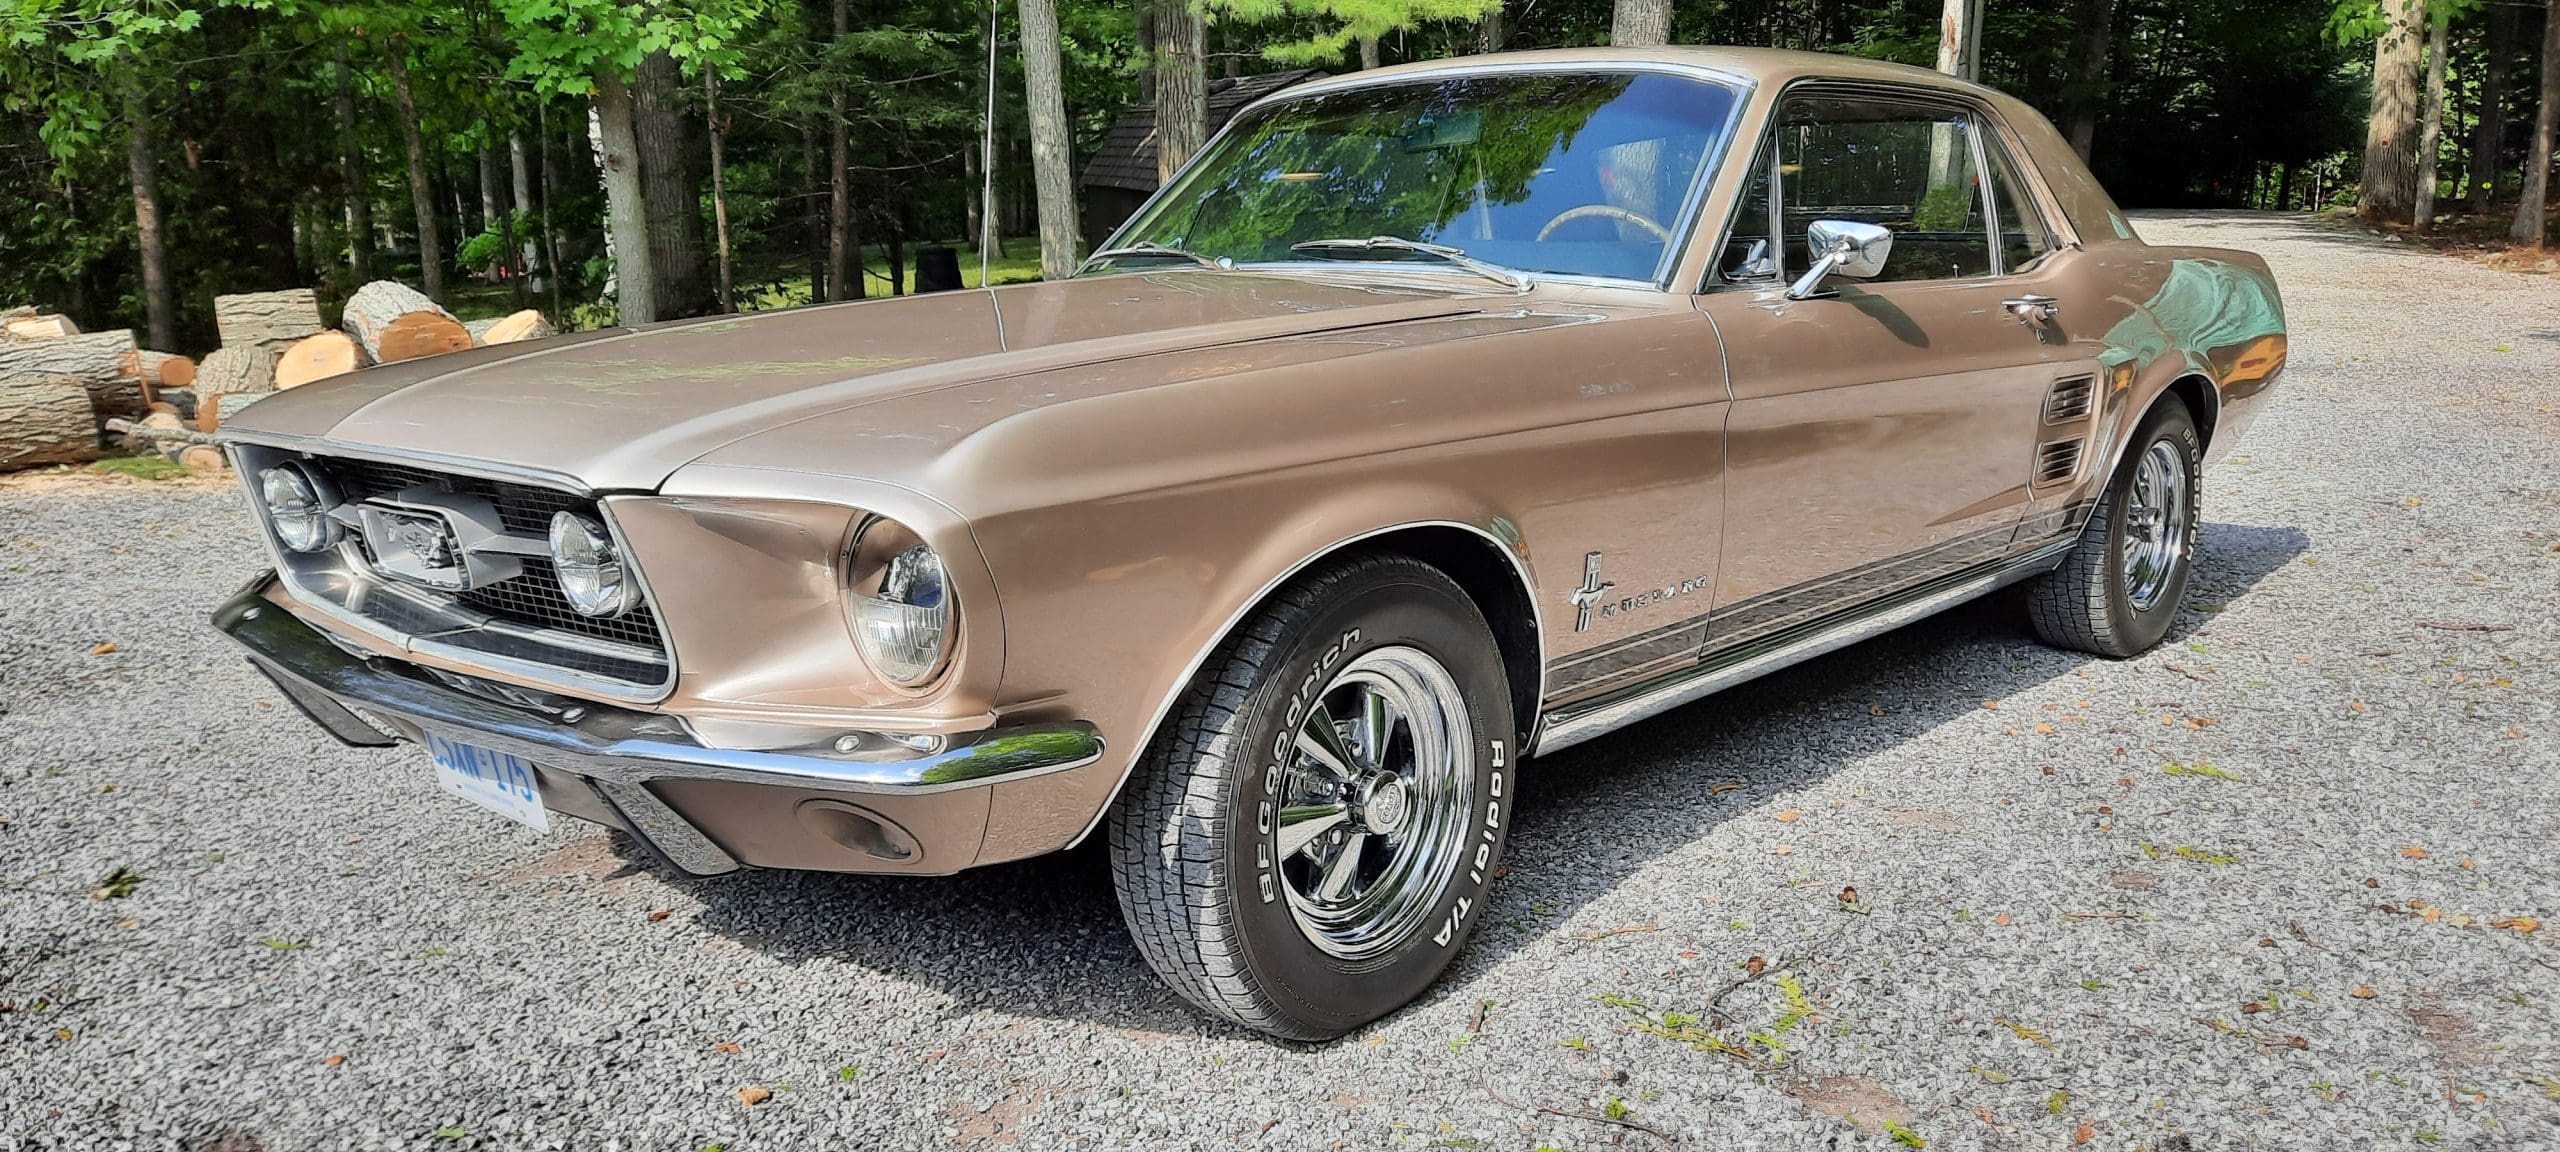 Beige Mist 1967 Ford Mustang